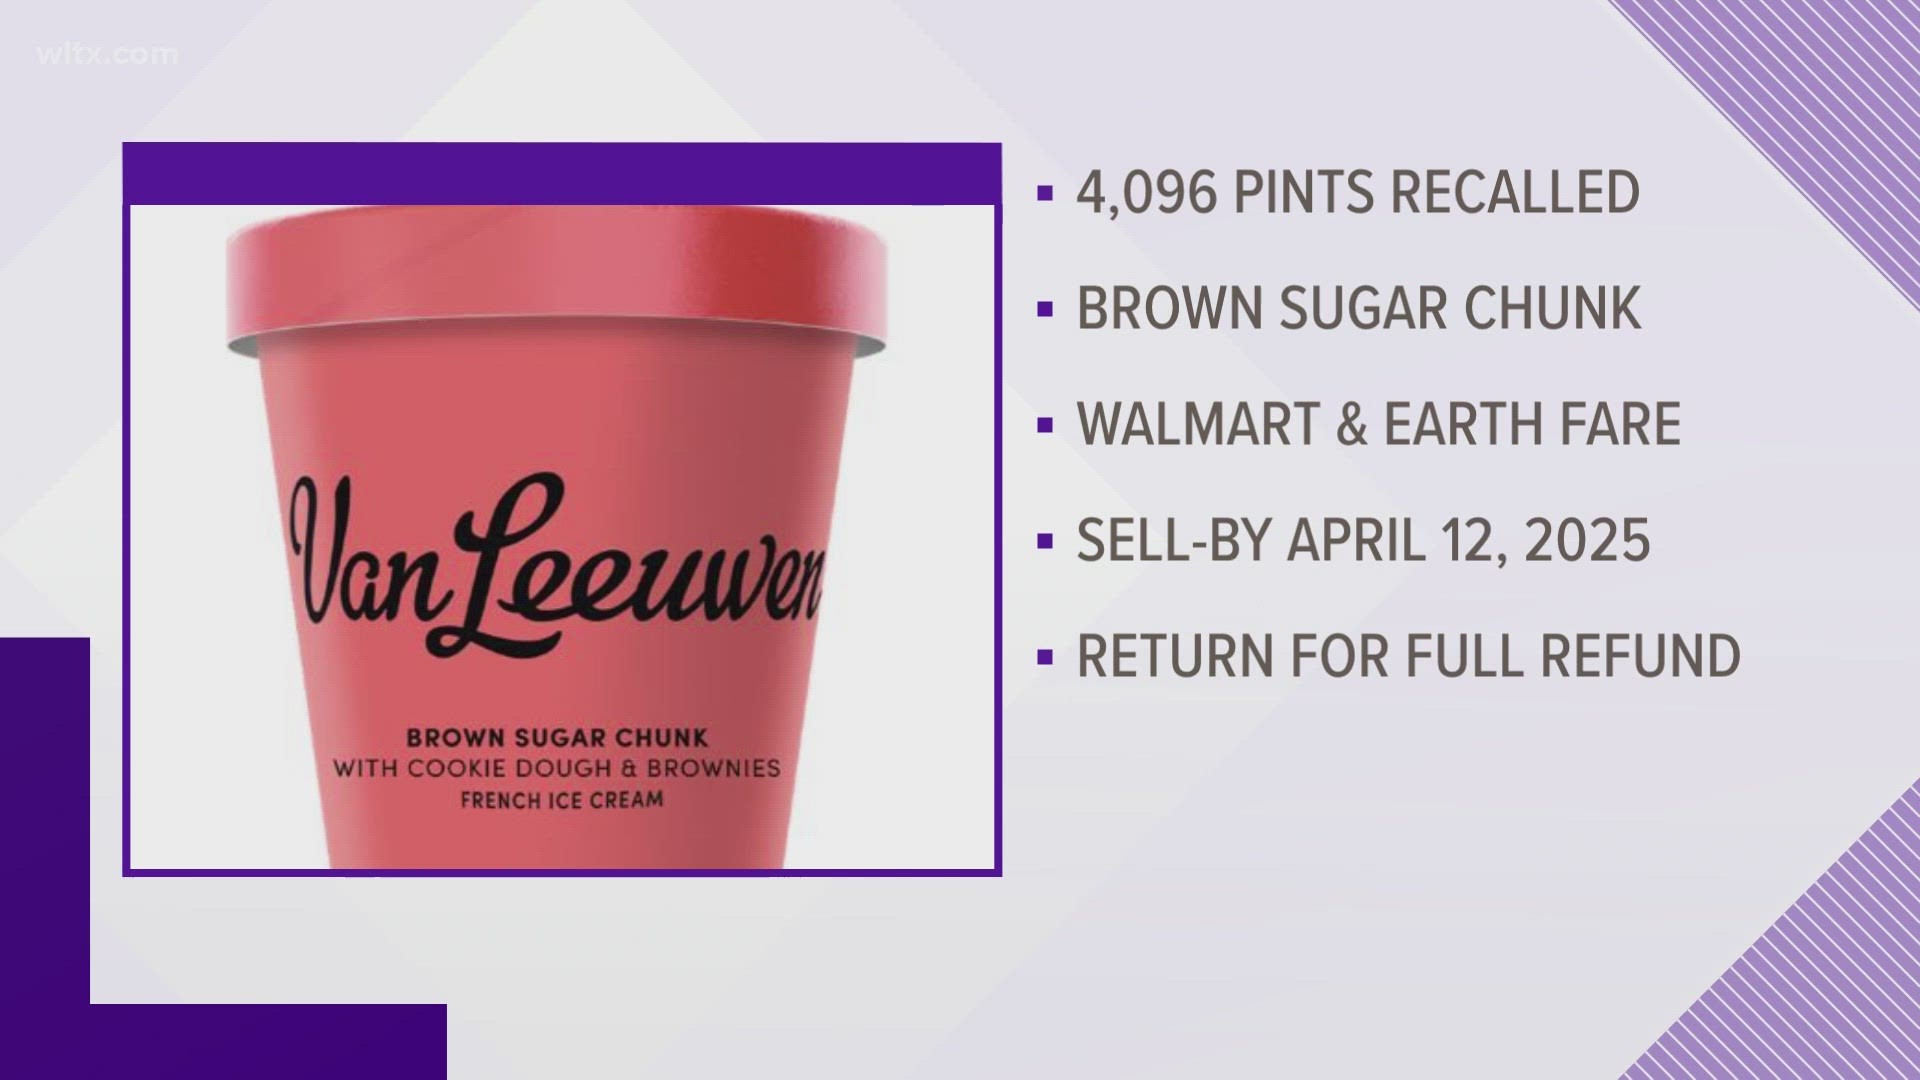 Van Leeuwen is recalling more than 4000 pints of its Brown Sugar Chunk and was sold nationwide at Walmart and Earthfare.